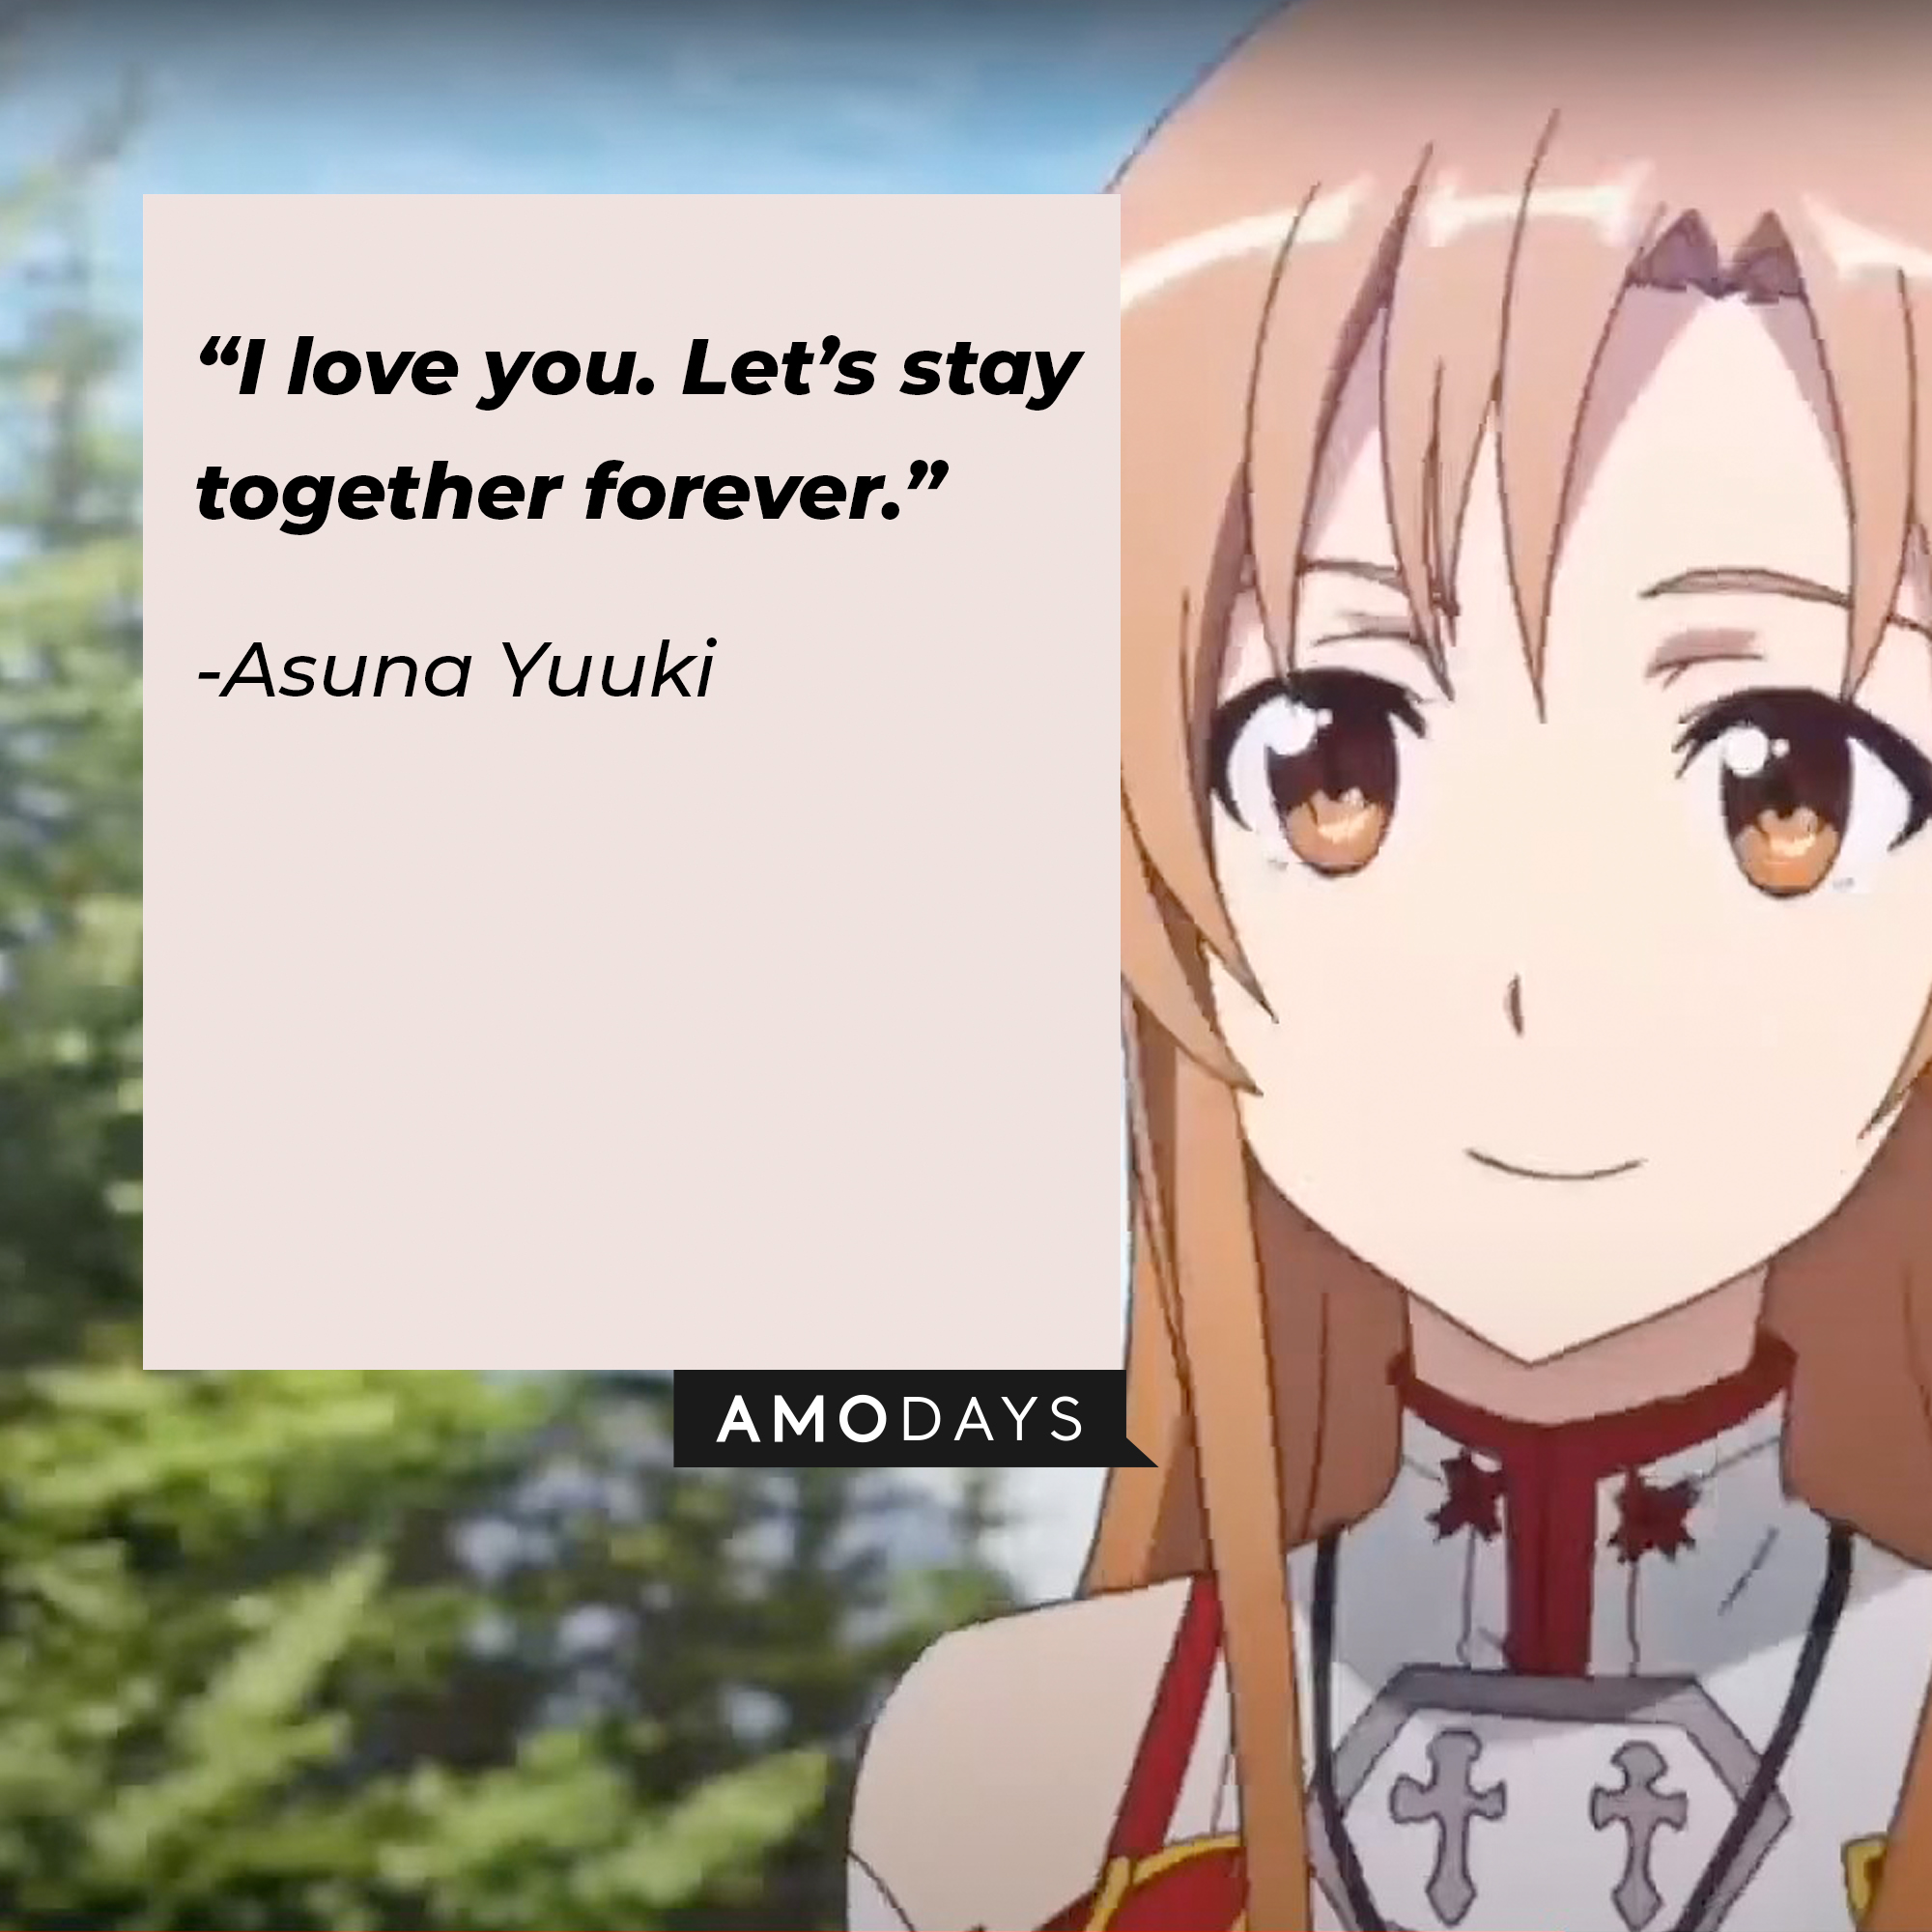 A picture of Asuna Yuuki with her quote: "I love you. Let's stay together forever." | Source: facebook.com/SwordArtOnlineUSA